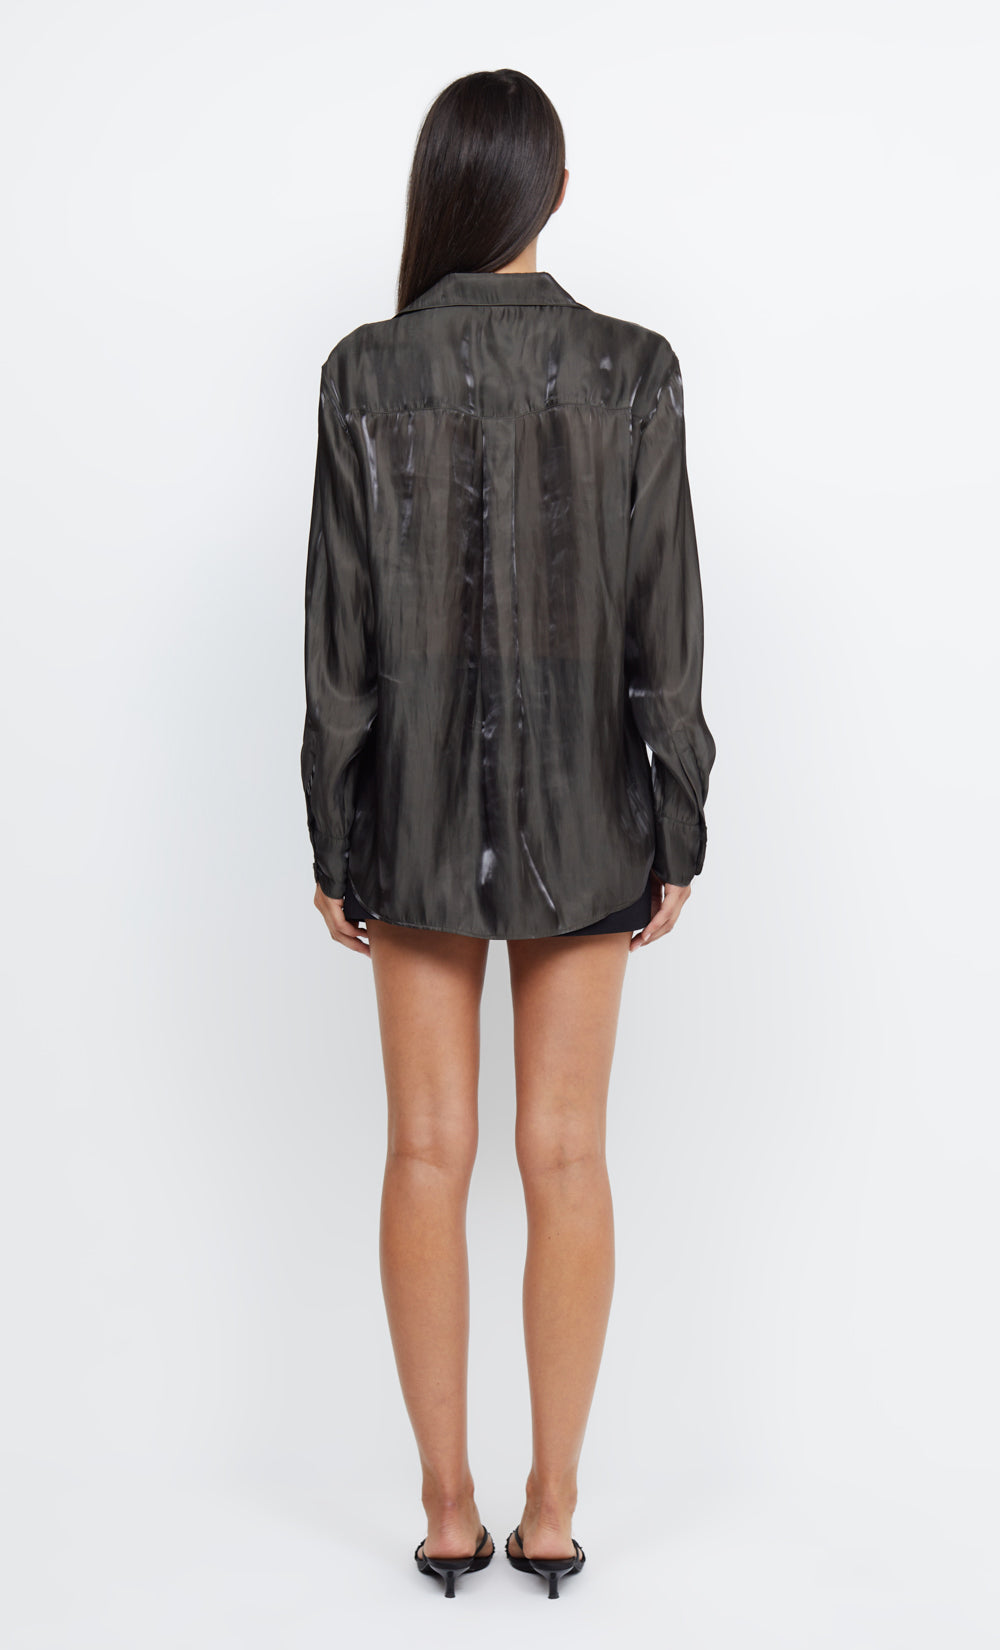 Topshop + Long Sleeve Faux Leather Shirtdress